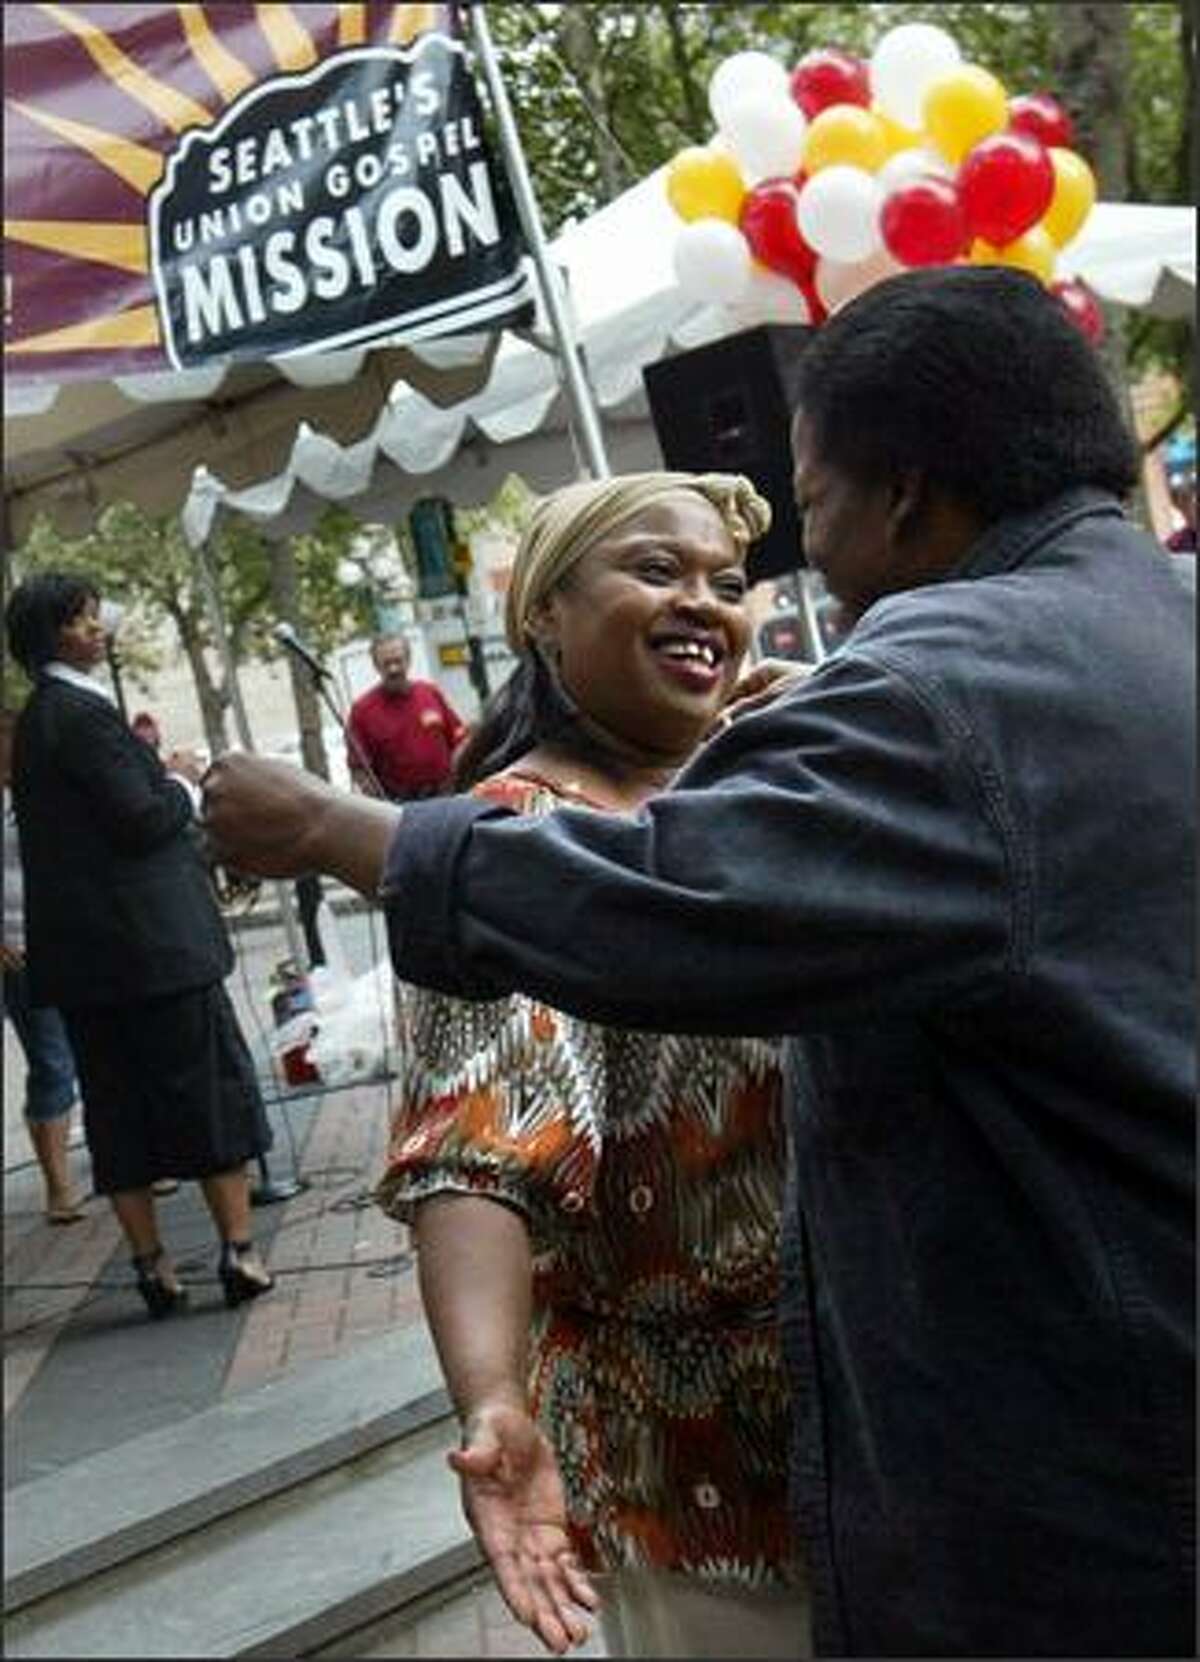 Gospel singer Josephine Howell hugs Raama Hunter at the Union Gospel Mission's 75th anniversary celebration Tuesday at Occidental Park. During her performance, Howell spoke about how she lived on the streets with her children for five years until she discovered the Union Gospel Mission.